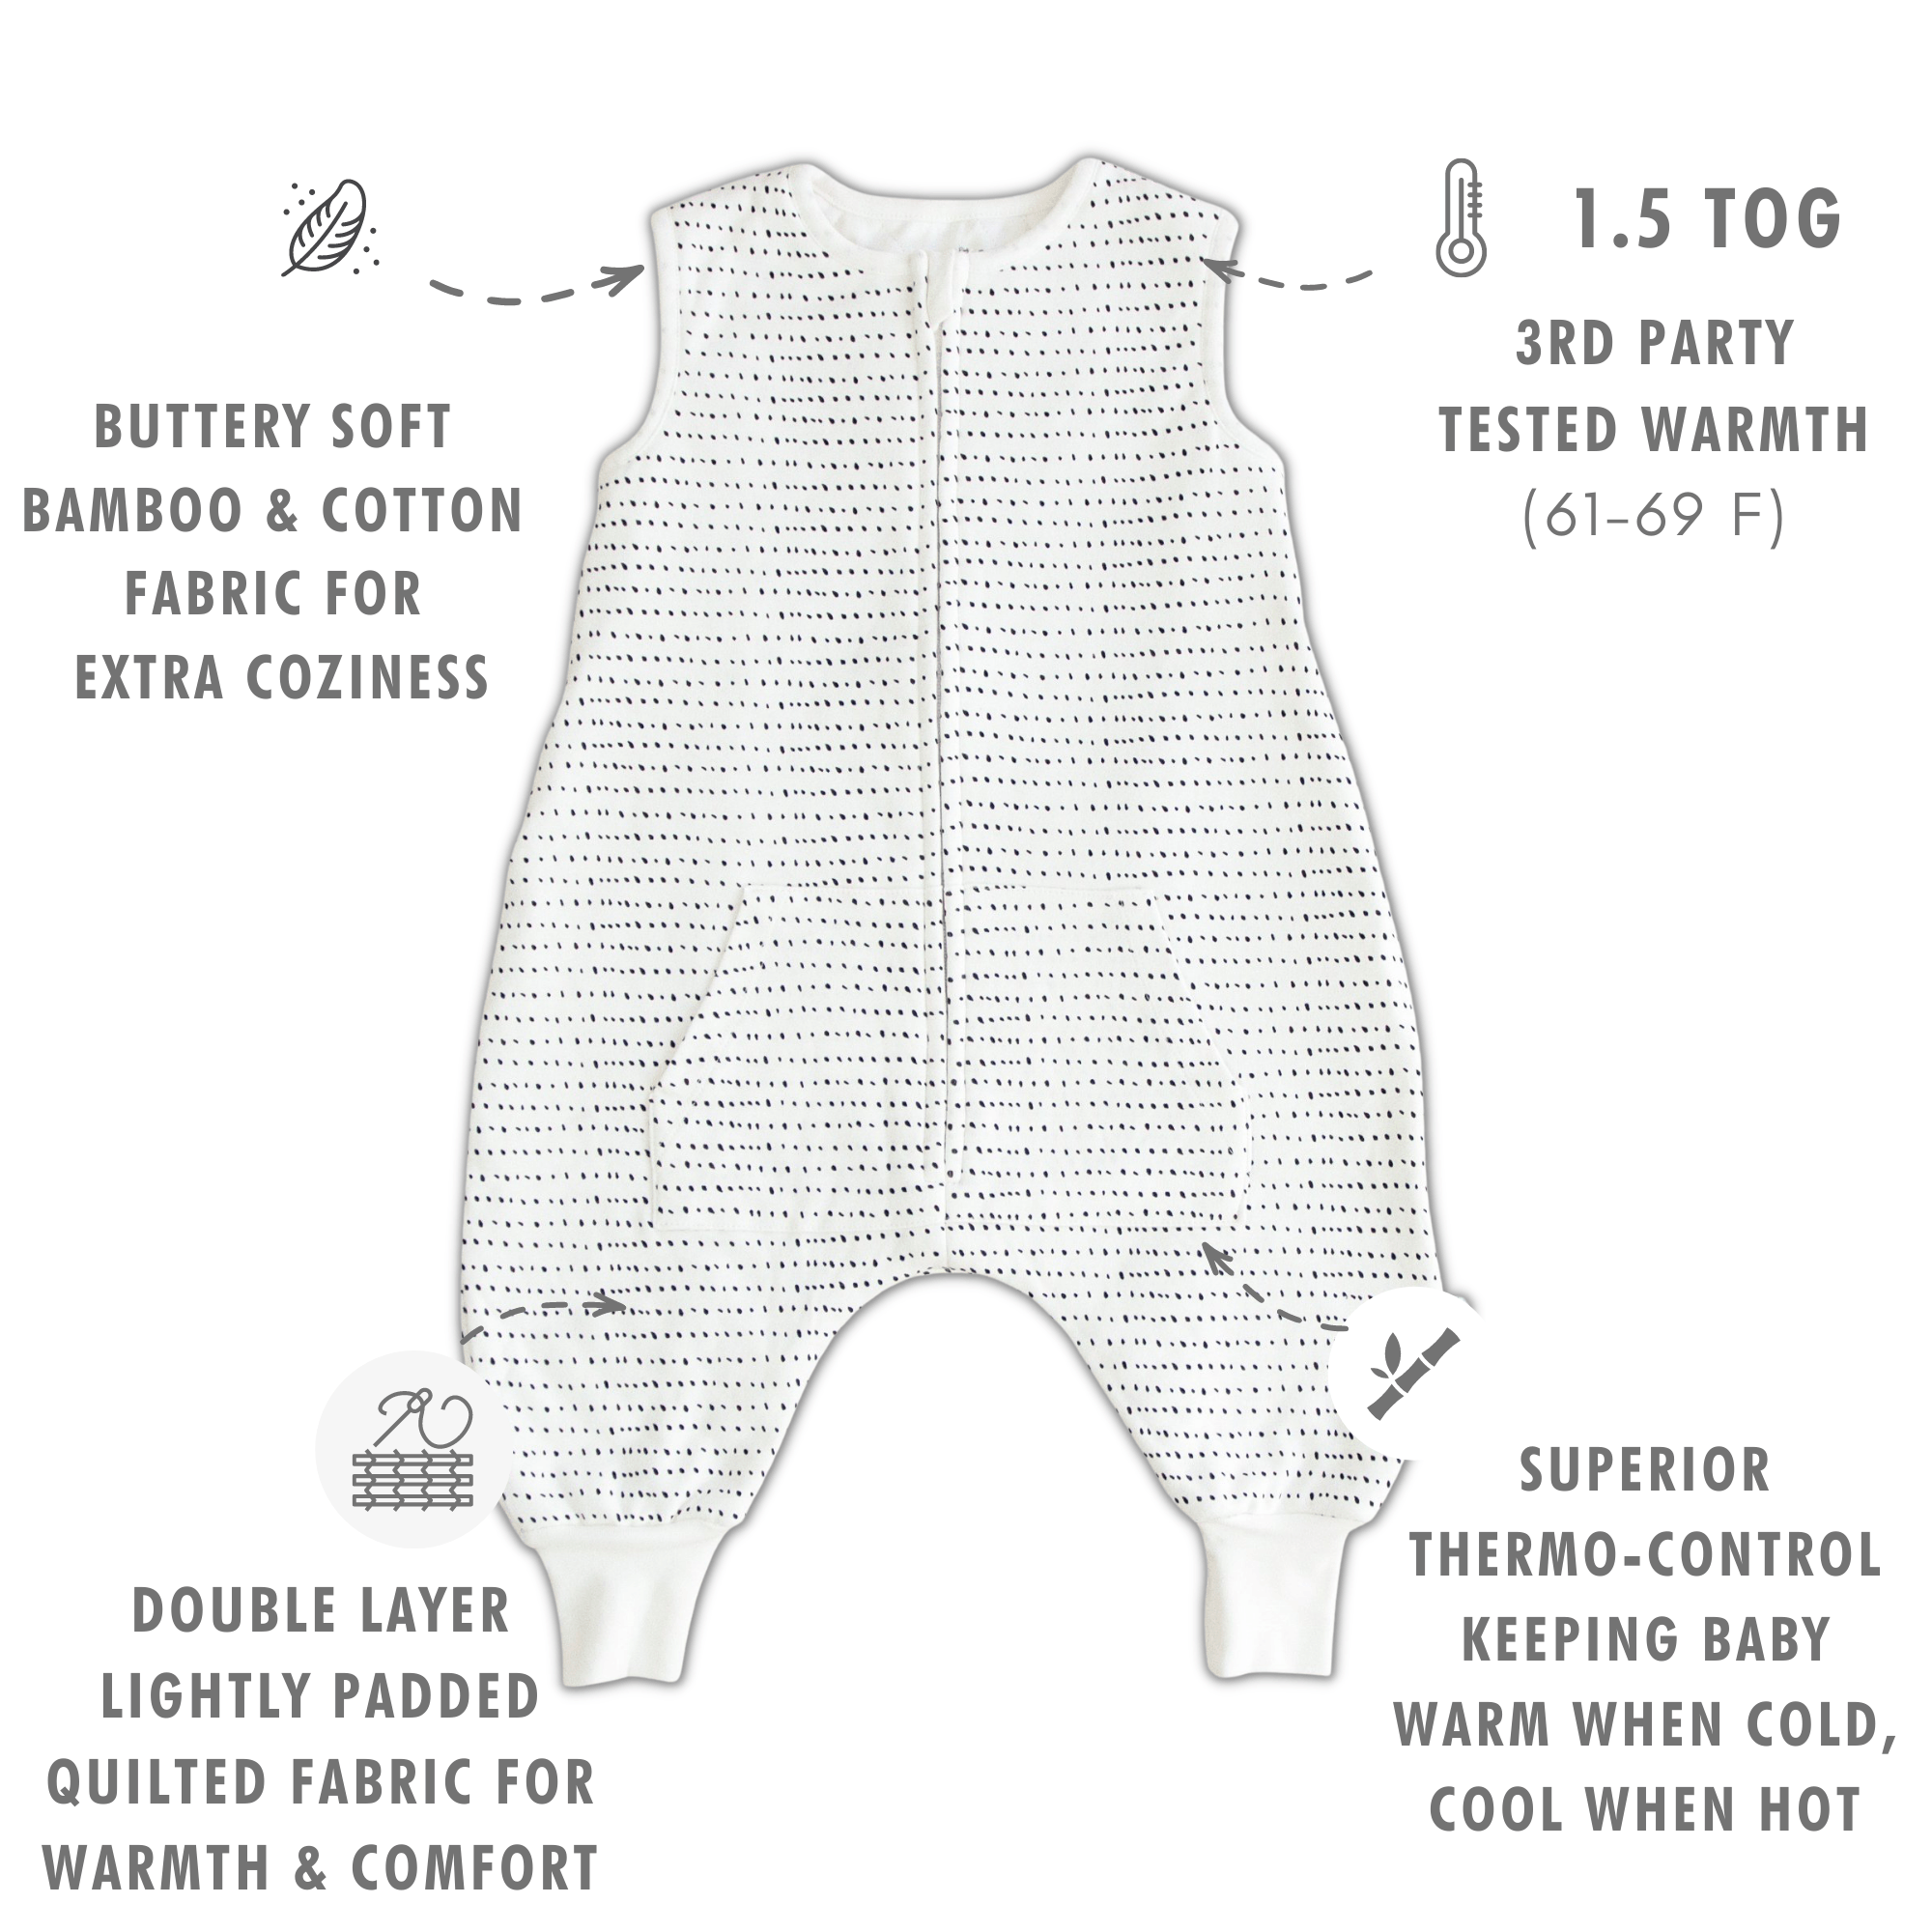 Tealbee Dreamsuit - Buttery soft bamboo & cotton fabric for extra coziness, 1.2 TOG 3rd party tested warmth (64 - 72 F), Double layer lightly padded quilted fabric for warmth and comfort, superior thermo-controlkeeping baby warm when cold, cool when hot.